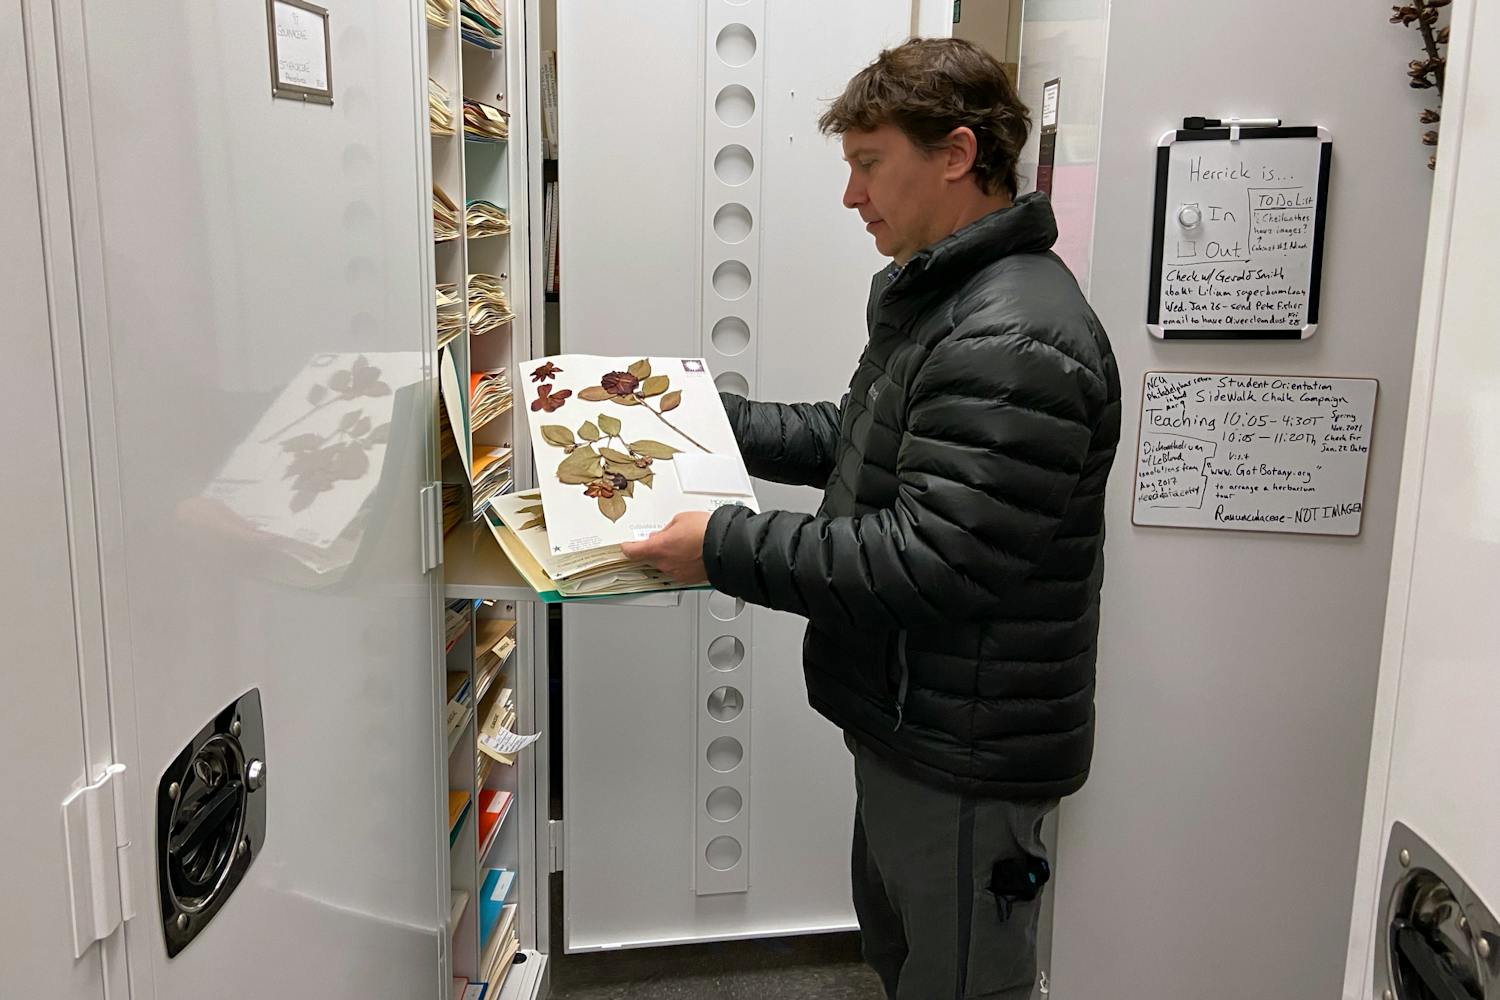 Herrick Brown, curator of the University of South Carolina’s A.C. Moore Herbarium, holds one of 140,000 dried plant specimens. Brown graduated from USC in 1996 with a degree in biology and has used this passion to pursue work in a variety of fields, including creating habitats for the animals at the Riverbanks Zoo in Columbia, SC.